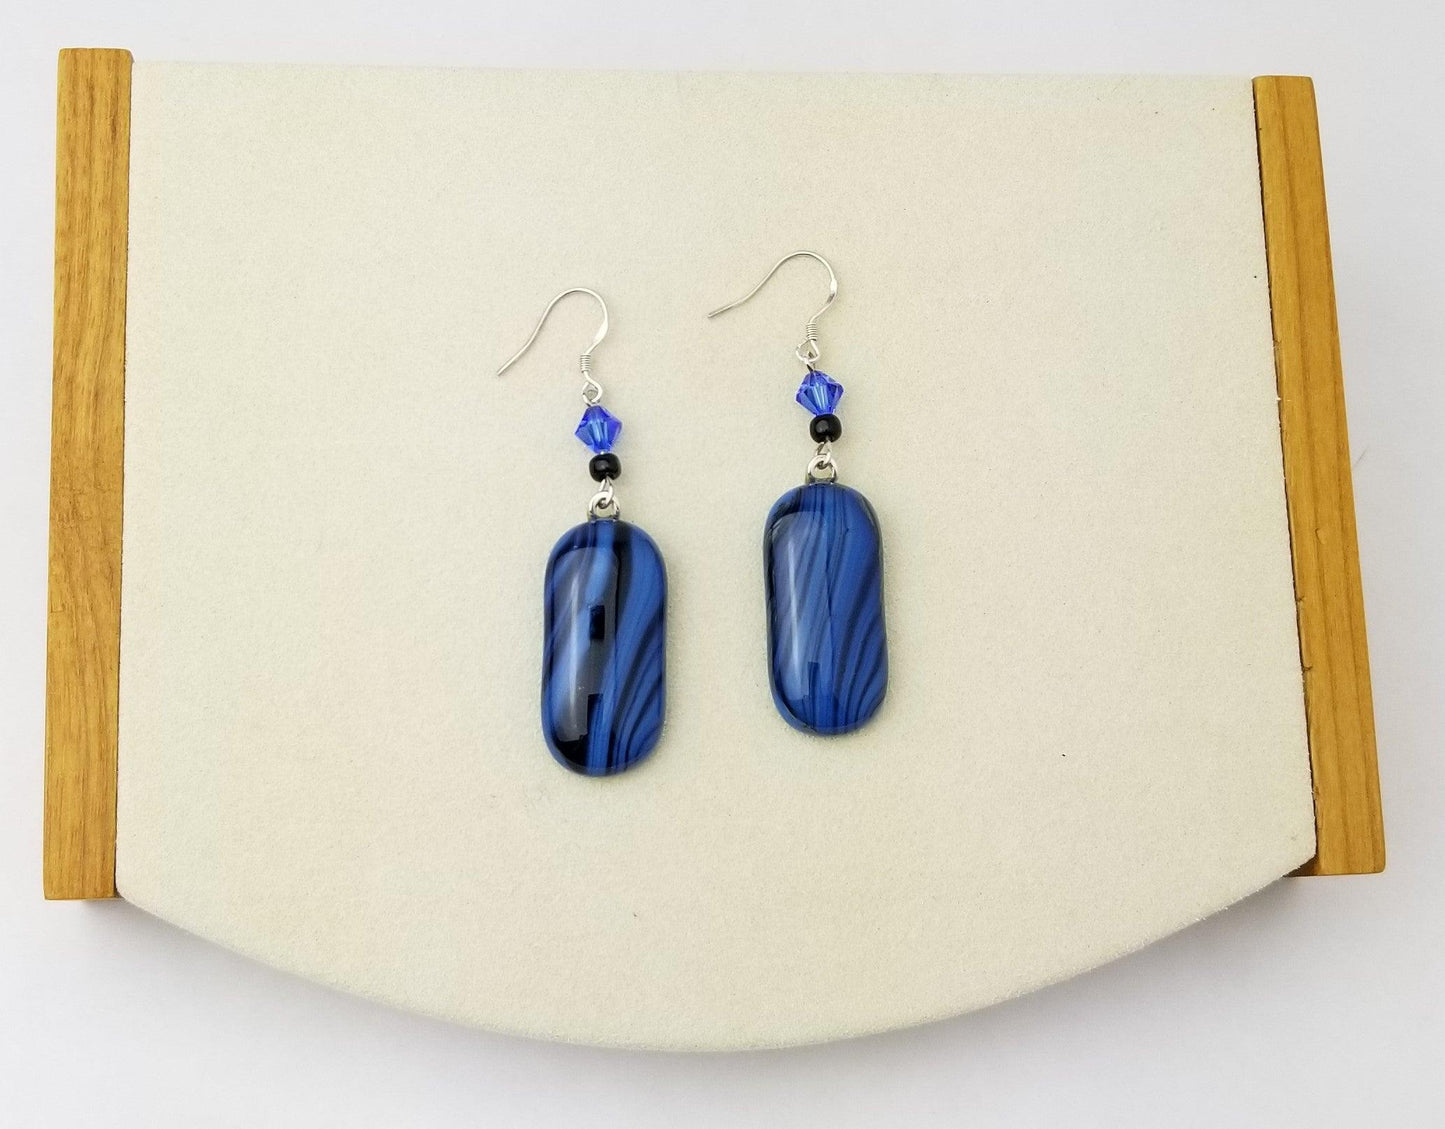 Blue and Black swirled fused glass pierced dangle earring with sterling silver ear wires from seeds glassworks